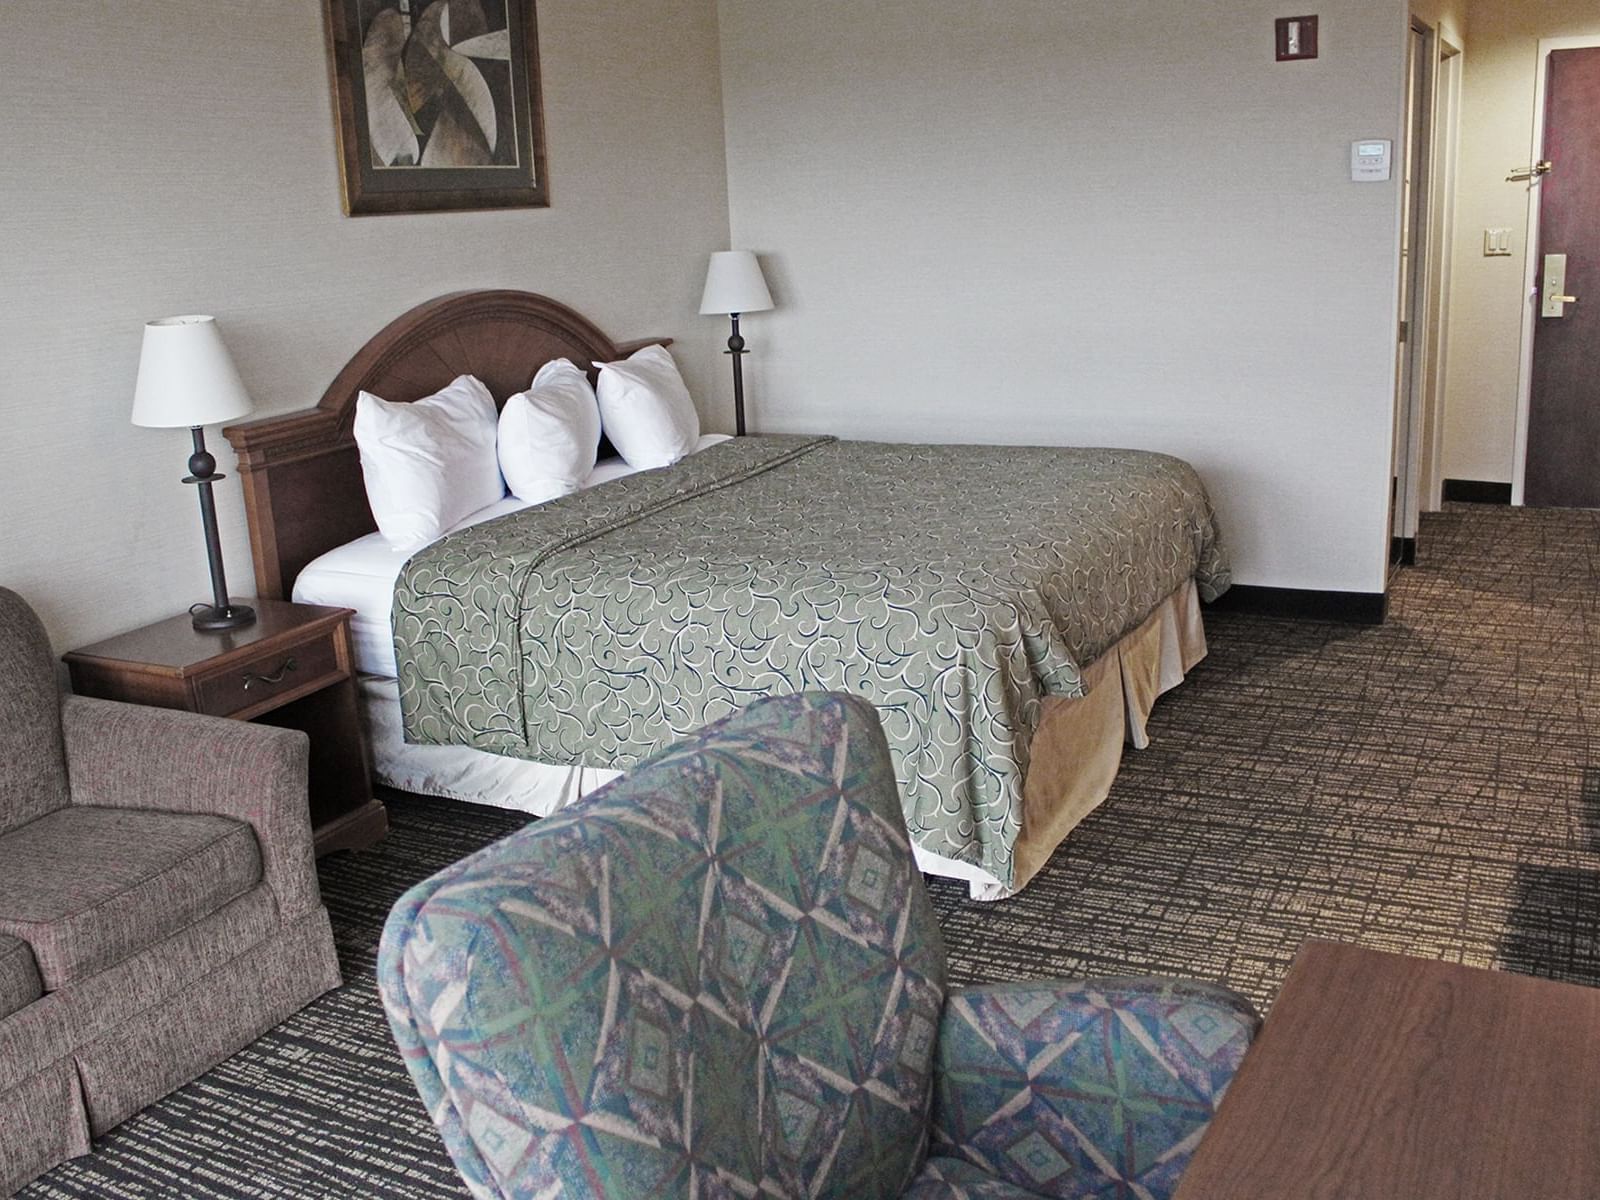 The King Standard Guest Room is a spacious room featuring a king bed, standard amenities, and a pull-out sleeper sofa.